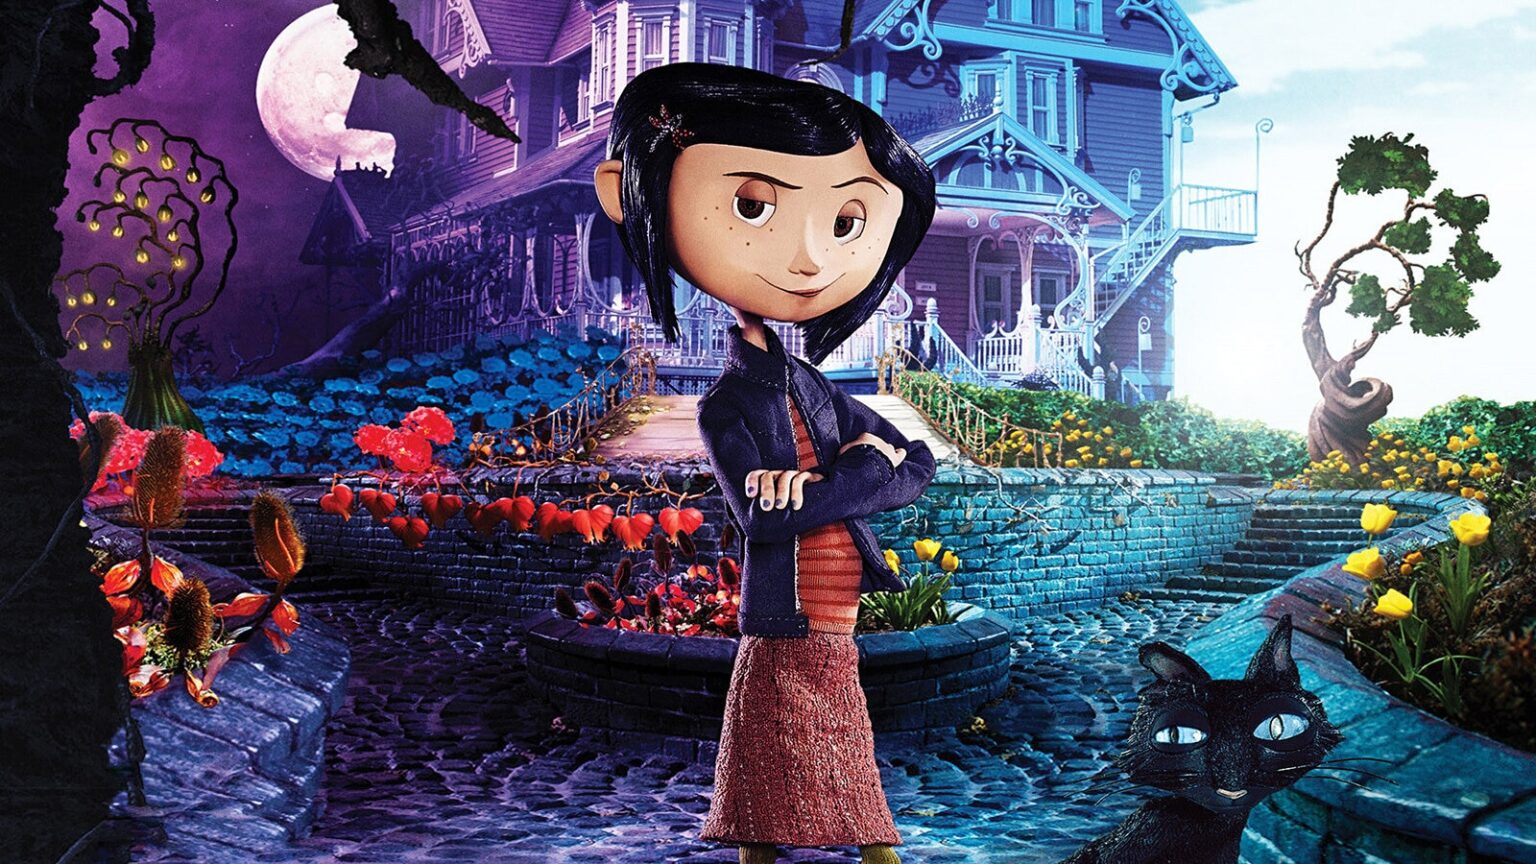 Gothtober 'Coraline' and all the best spooky movies for the whole